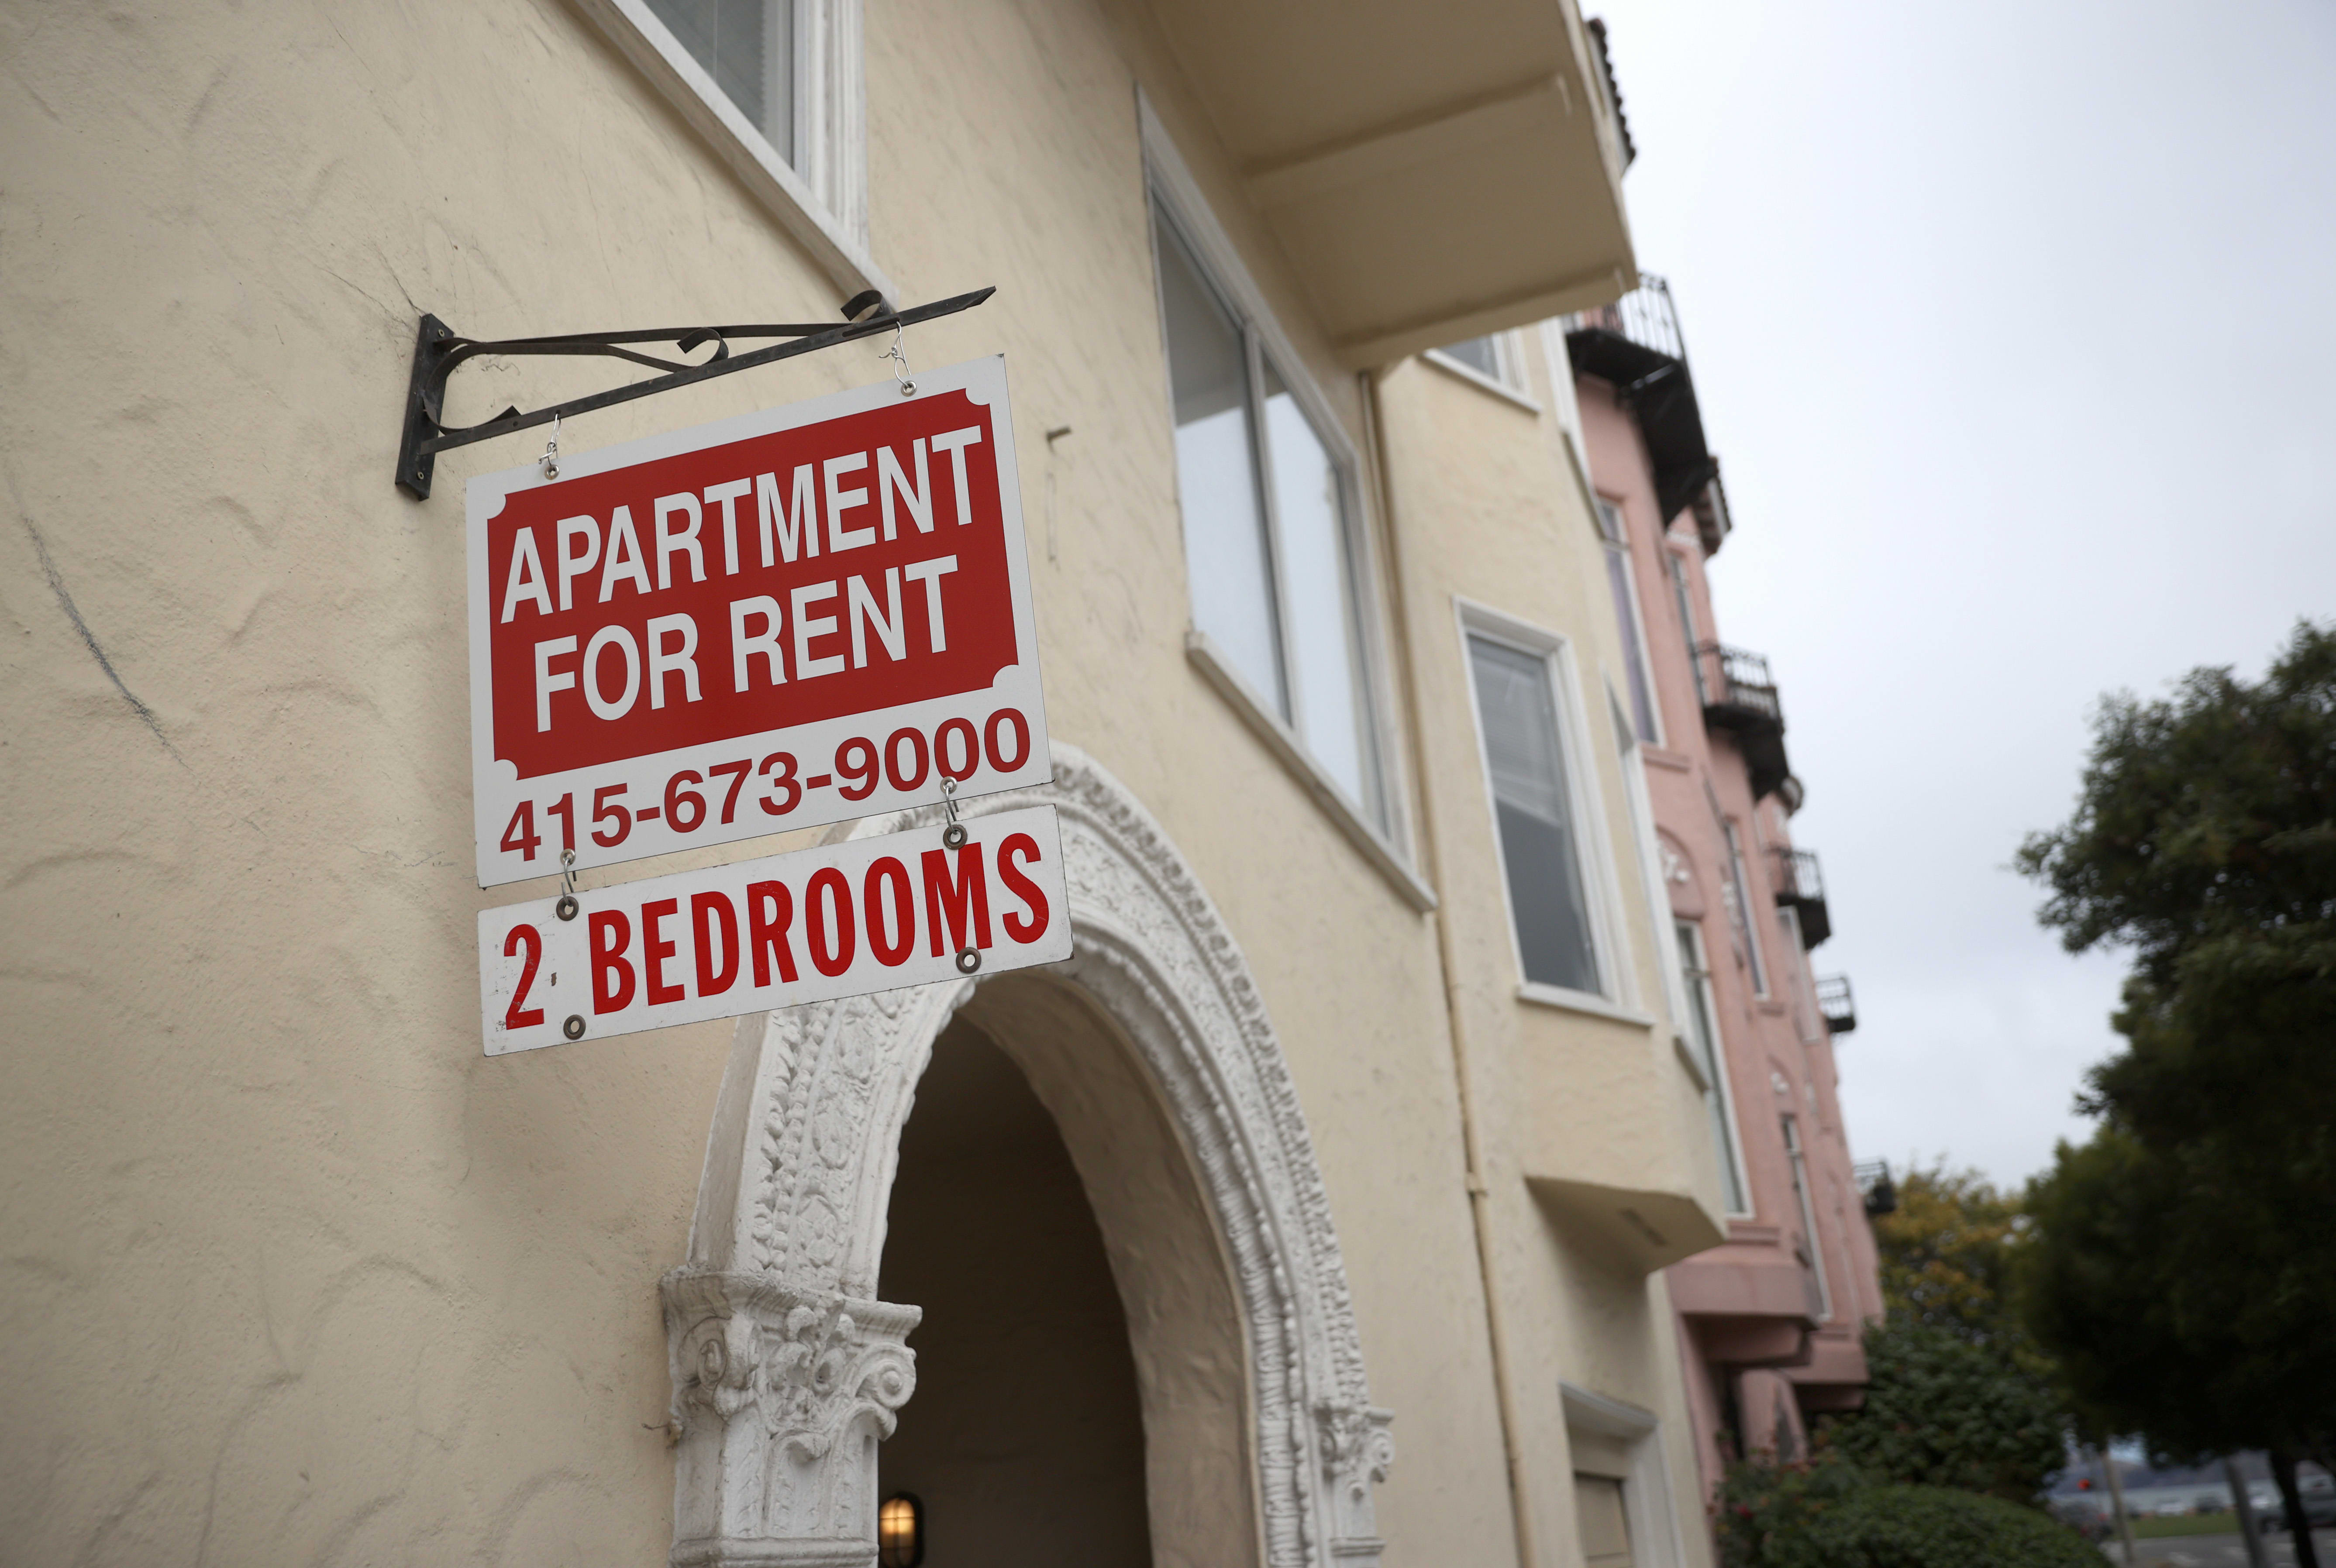 Apartment rent and occupancy hit record highs in November